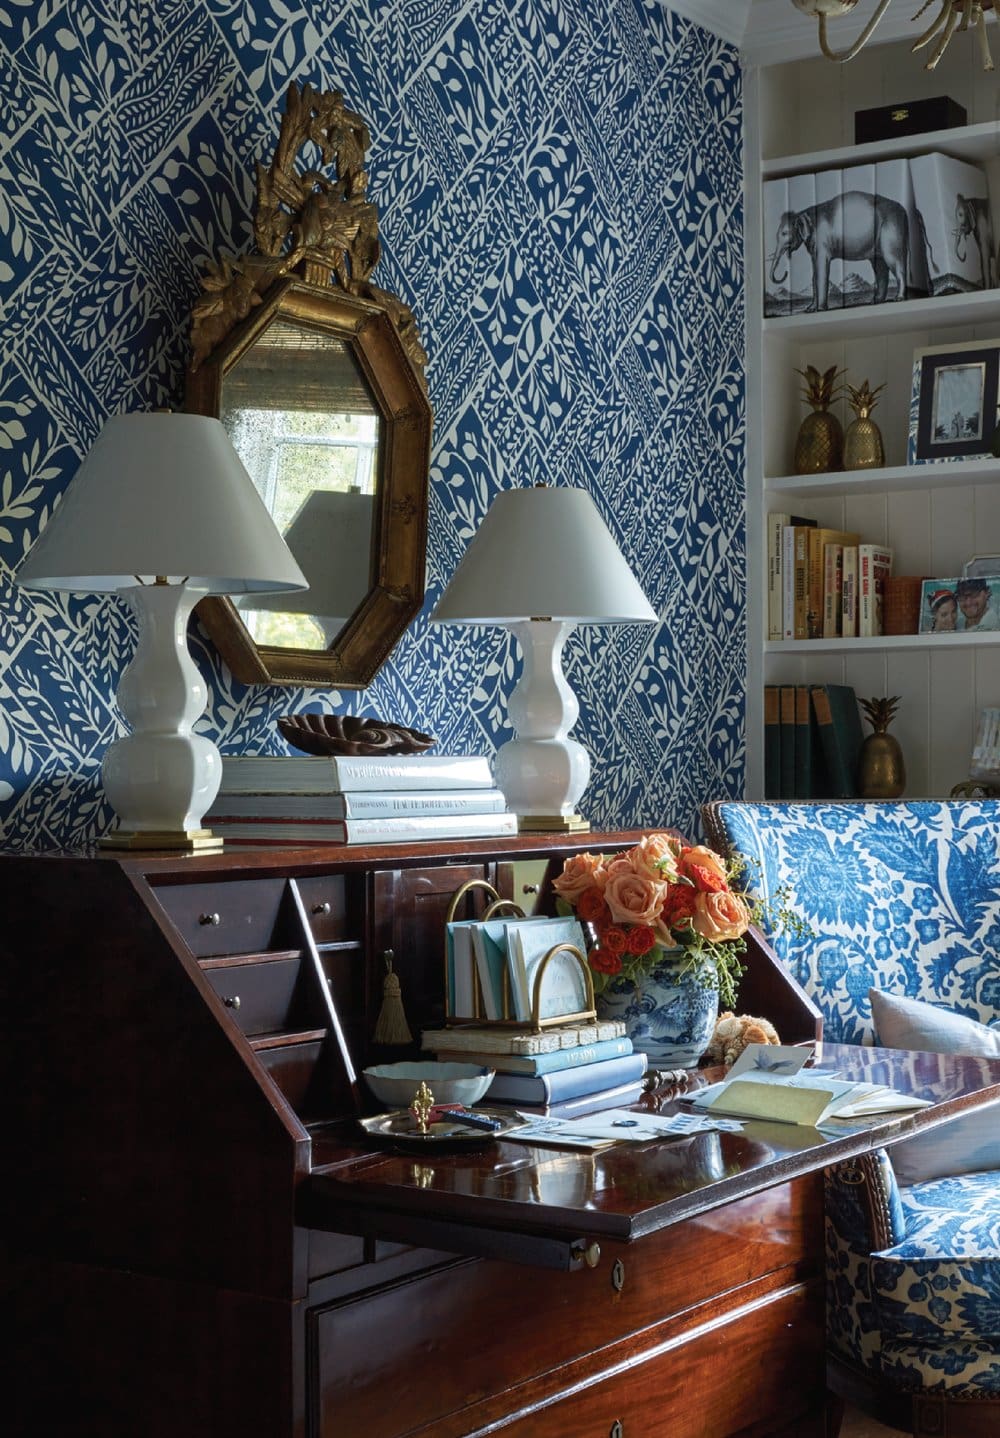 White and blue study room featured in interiors designed by Heather Chadduck